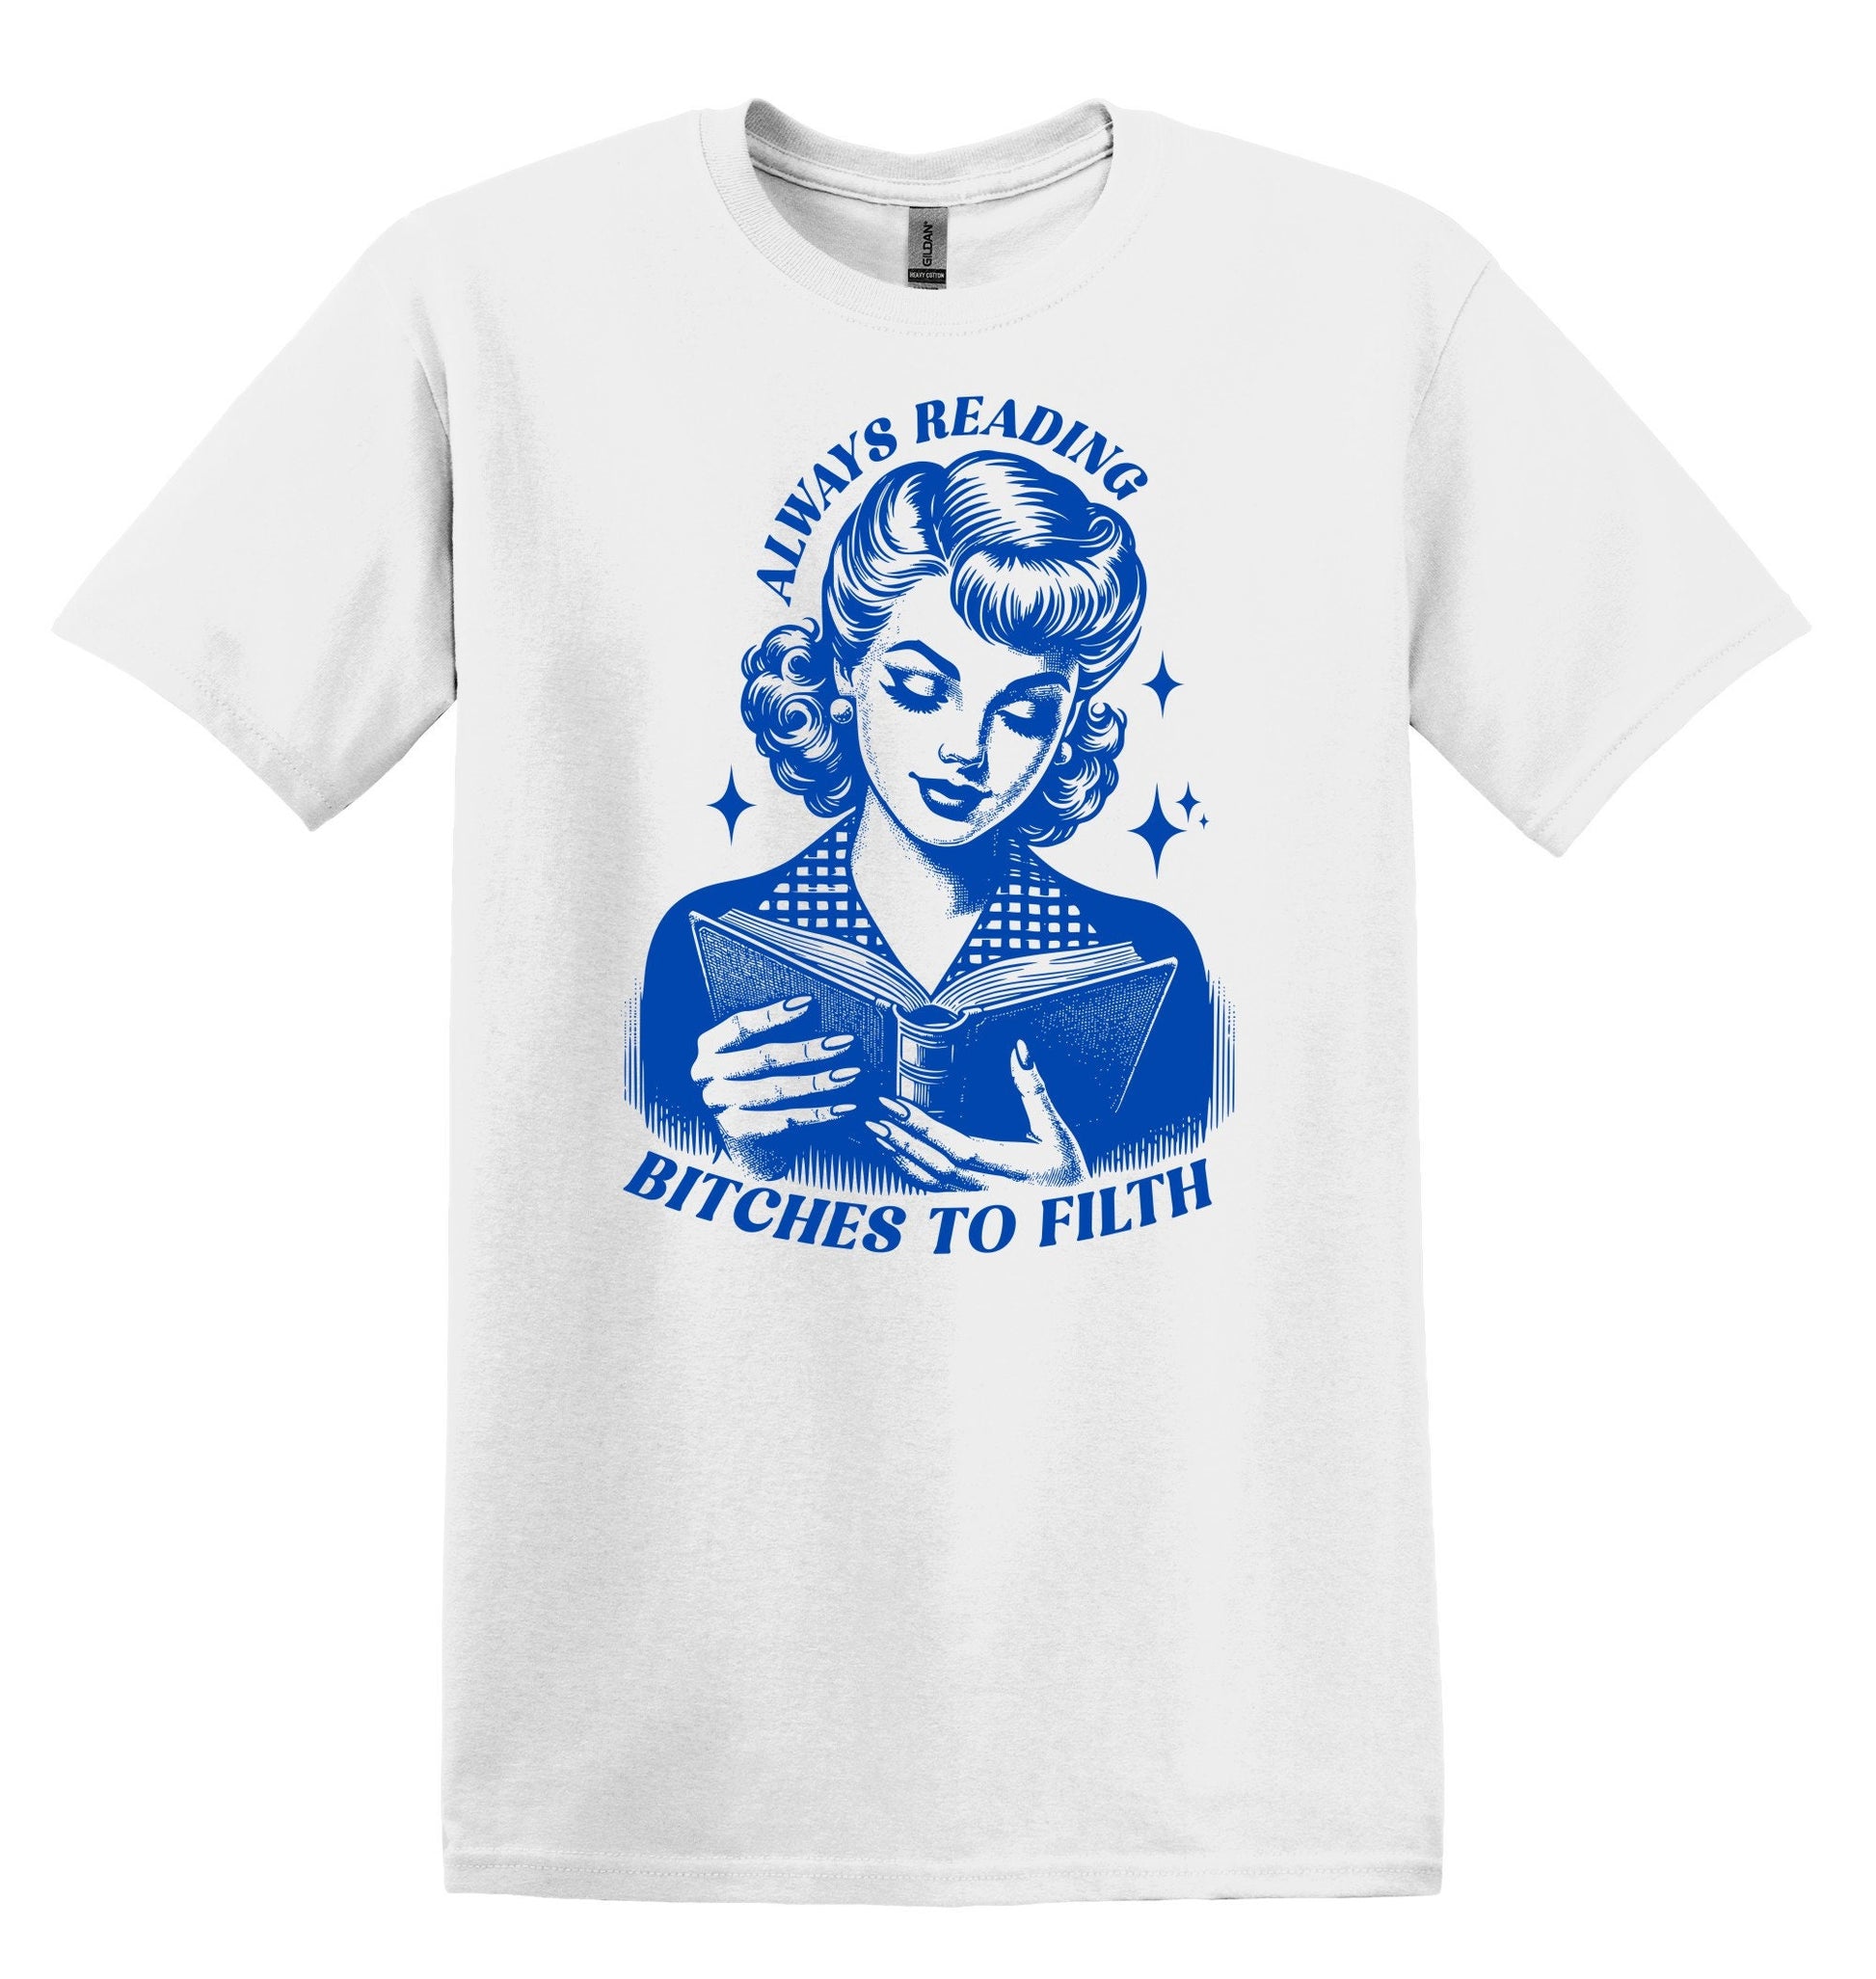 Always Reading Bitches to Filth Shirt Book shirt Book Lover TShirt Book Club Shirt Book Gift book Lover Gifts Reading Shirt